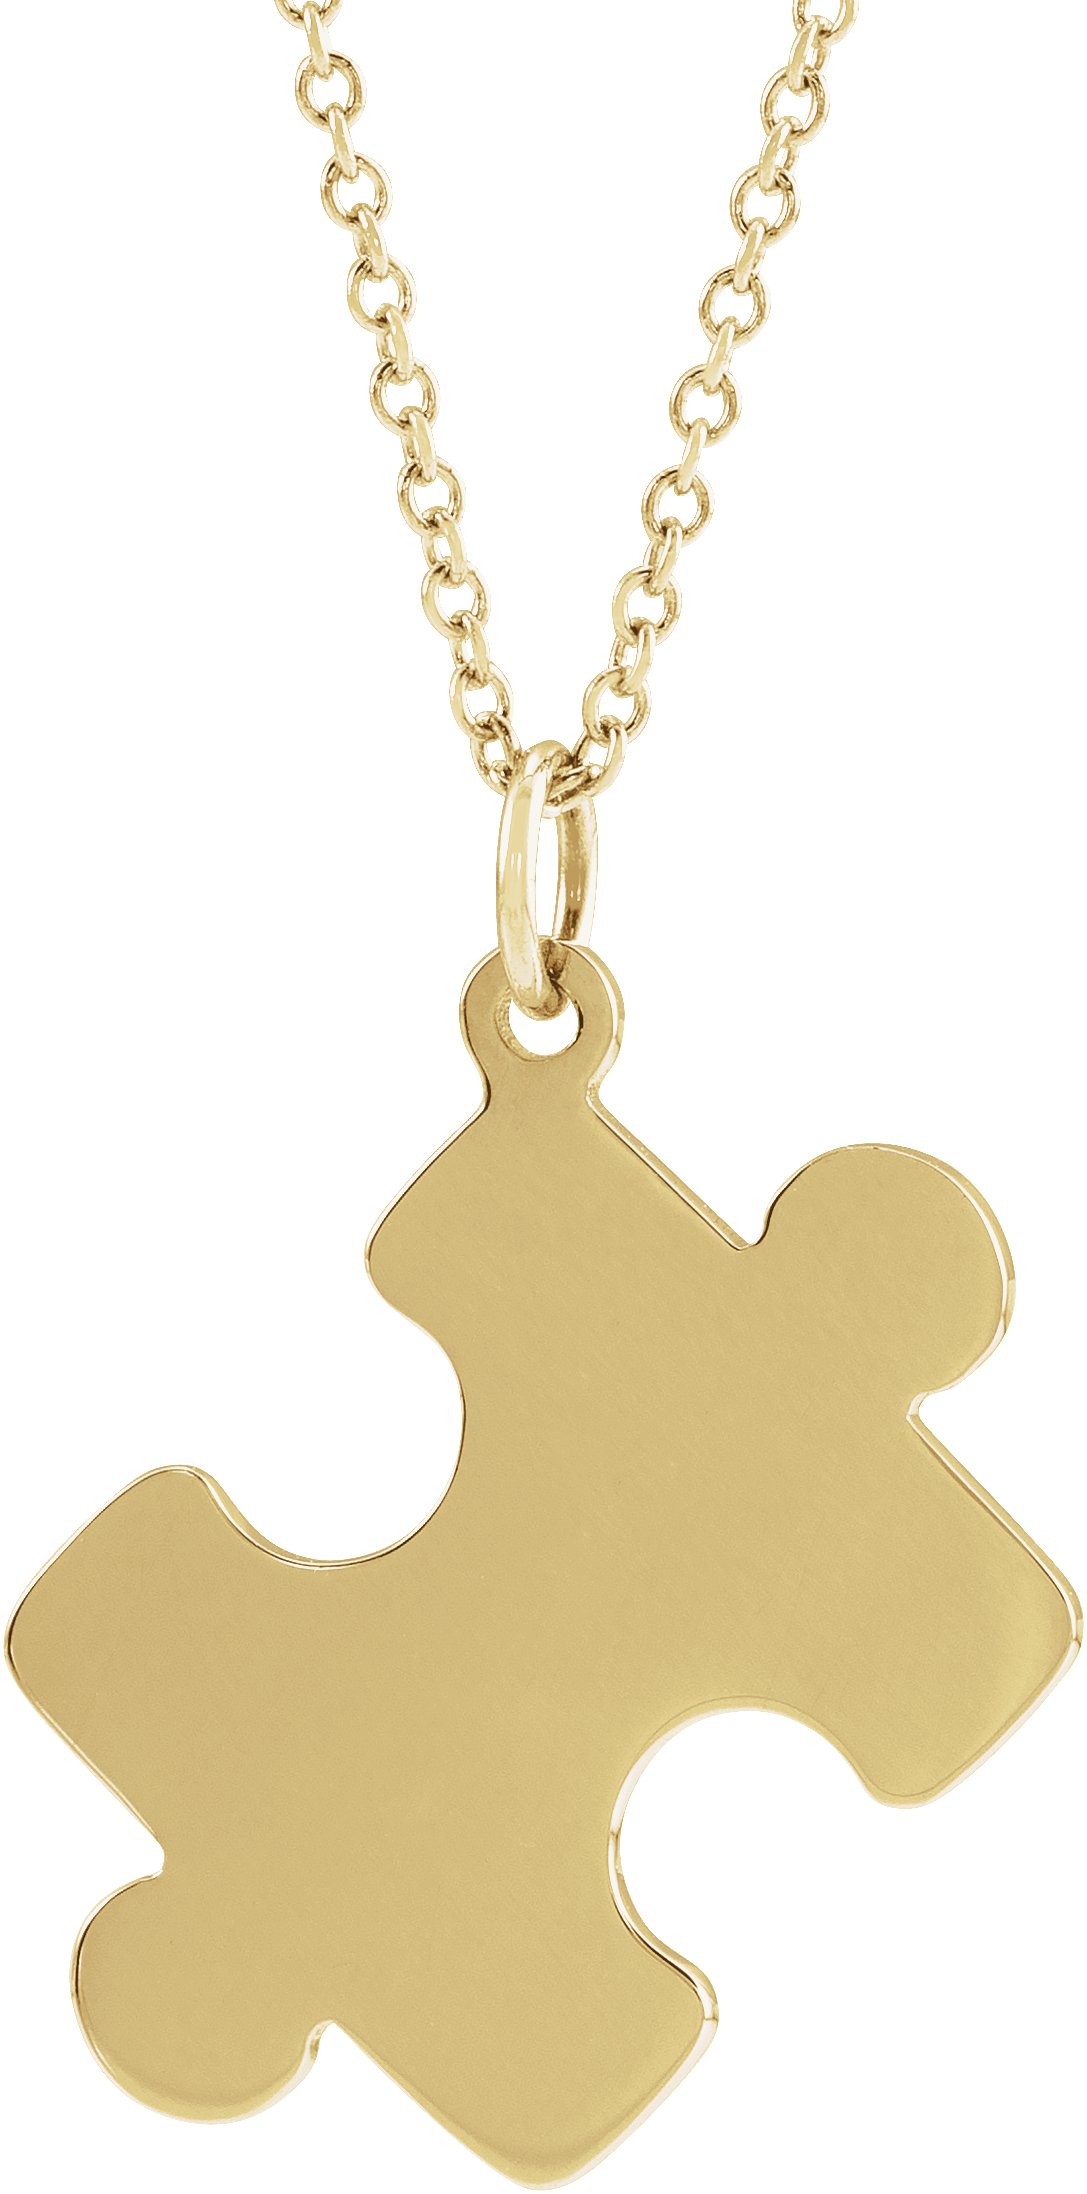 18K Yellow Gold Plated Sterling Silver 15.65x12 mm Puzzle Piece 16 18 inch Necklace Ref. 17554088